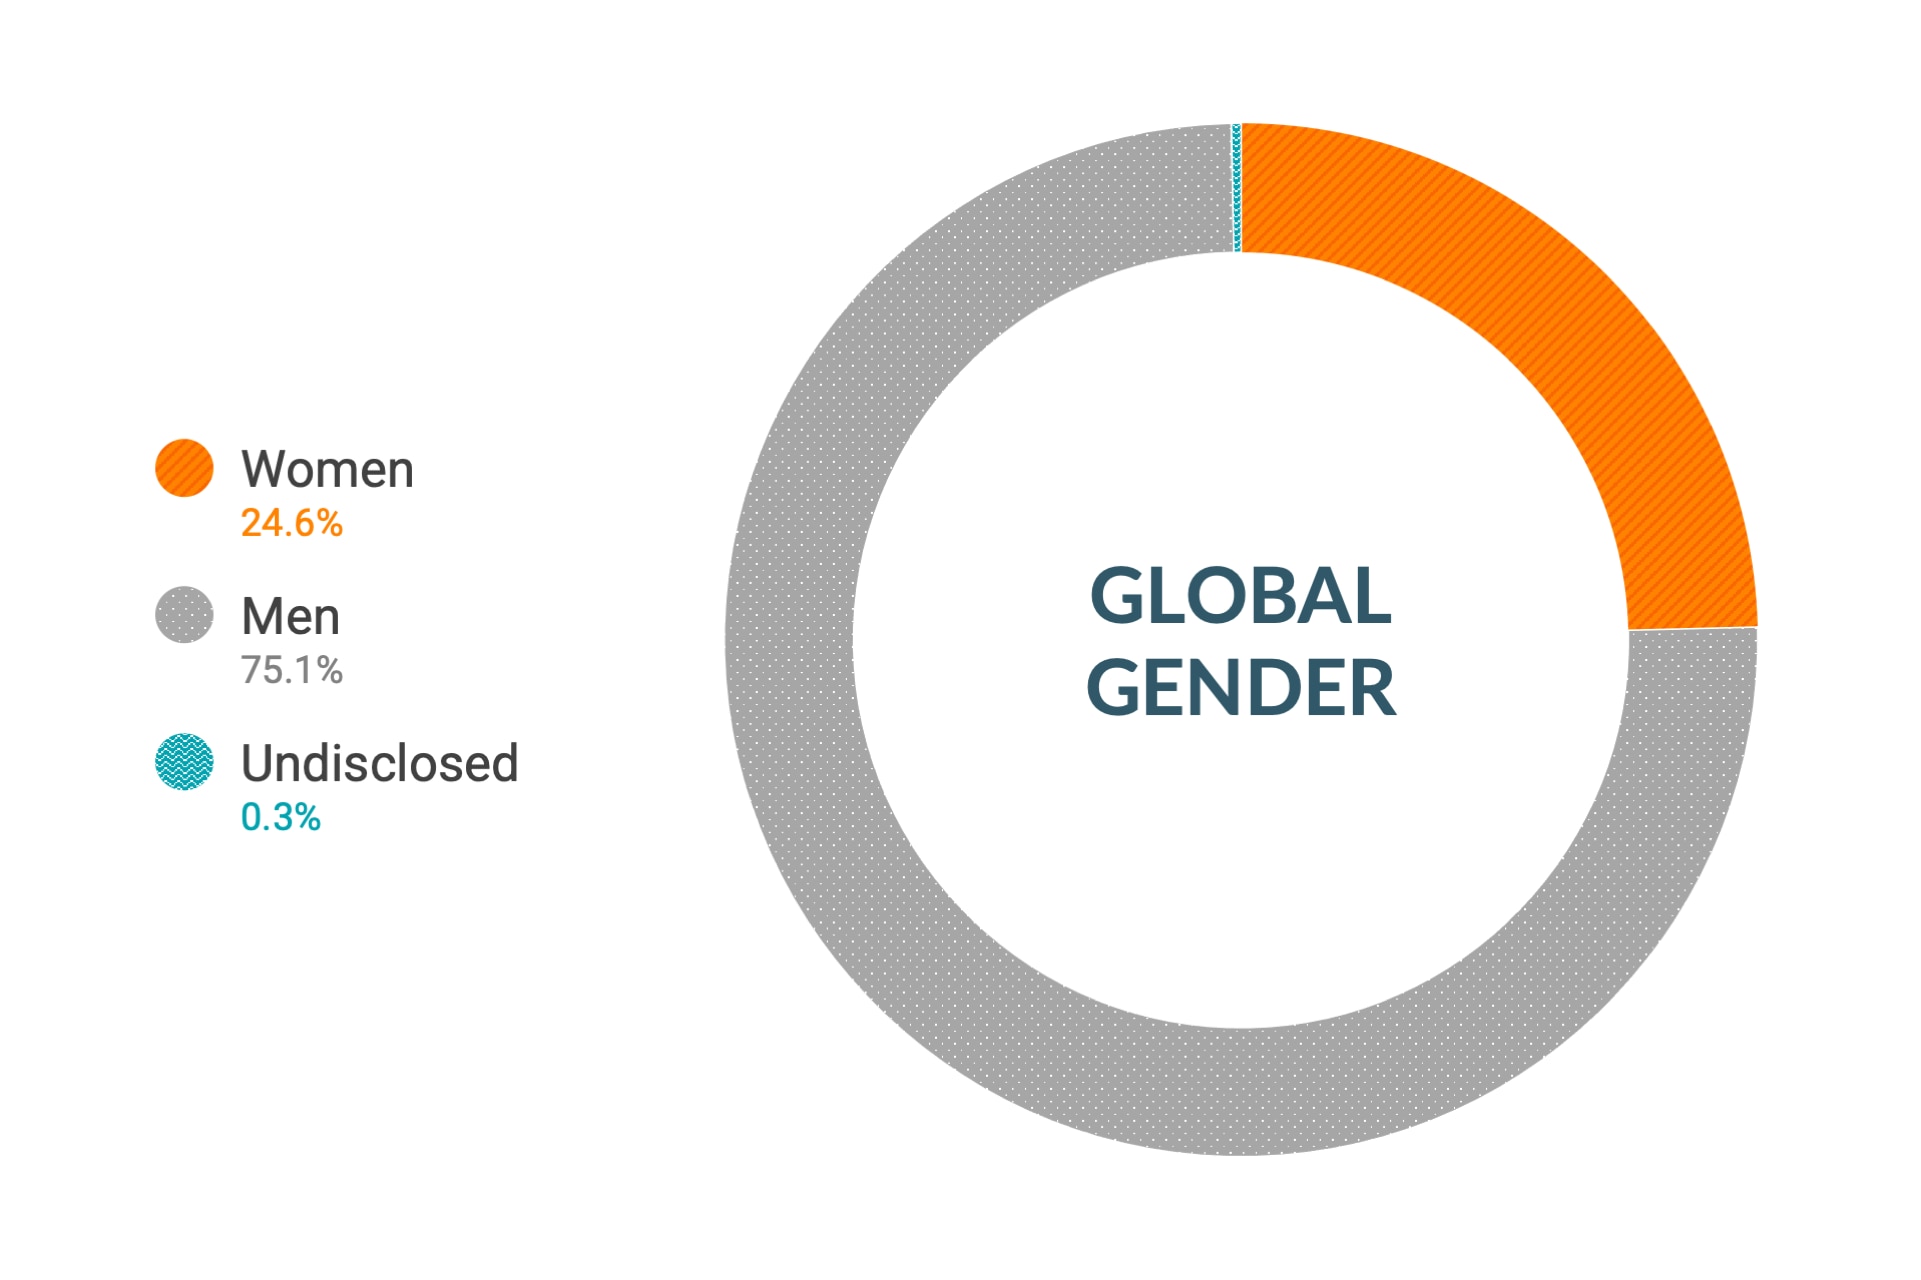 Cloudera Diversity and Inclusion data for Global Gender: Women 25.1%, Men 74.6%, 0.3% Undisclosed